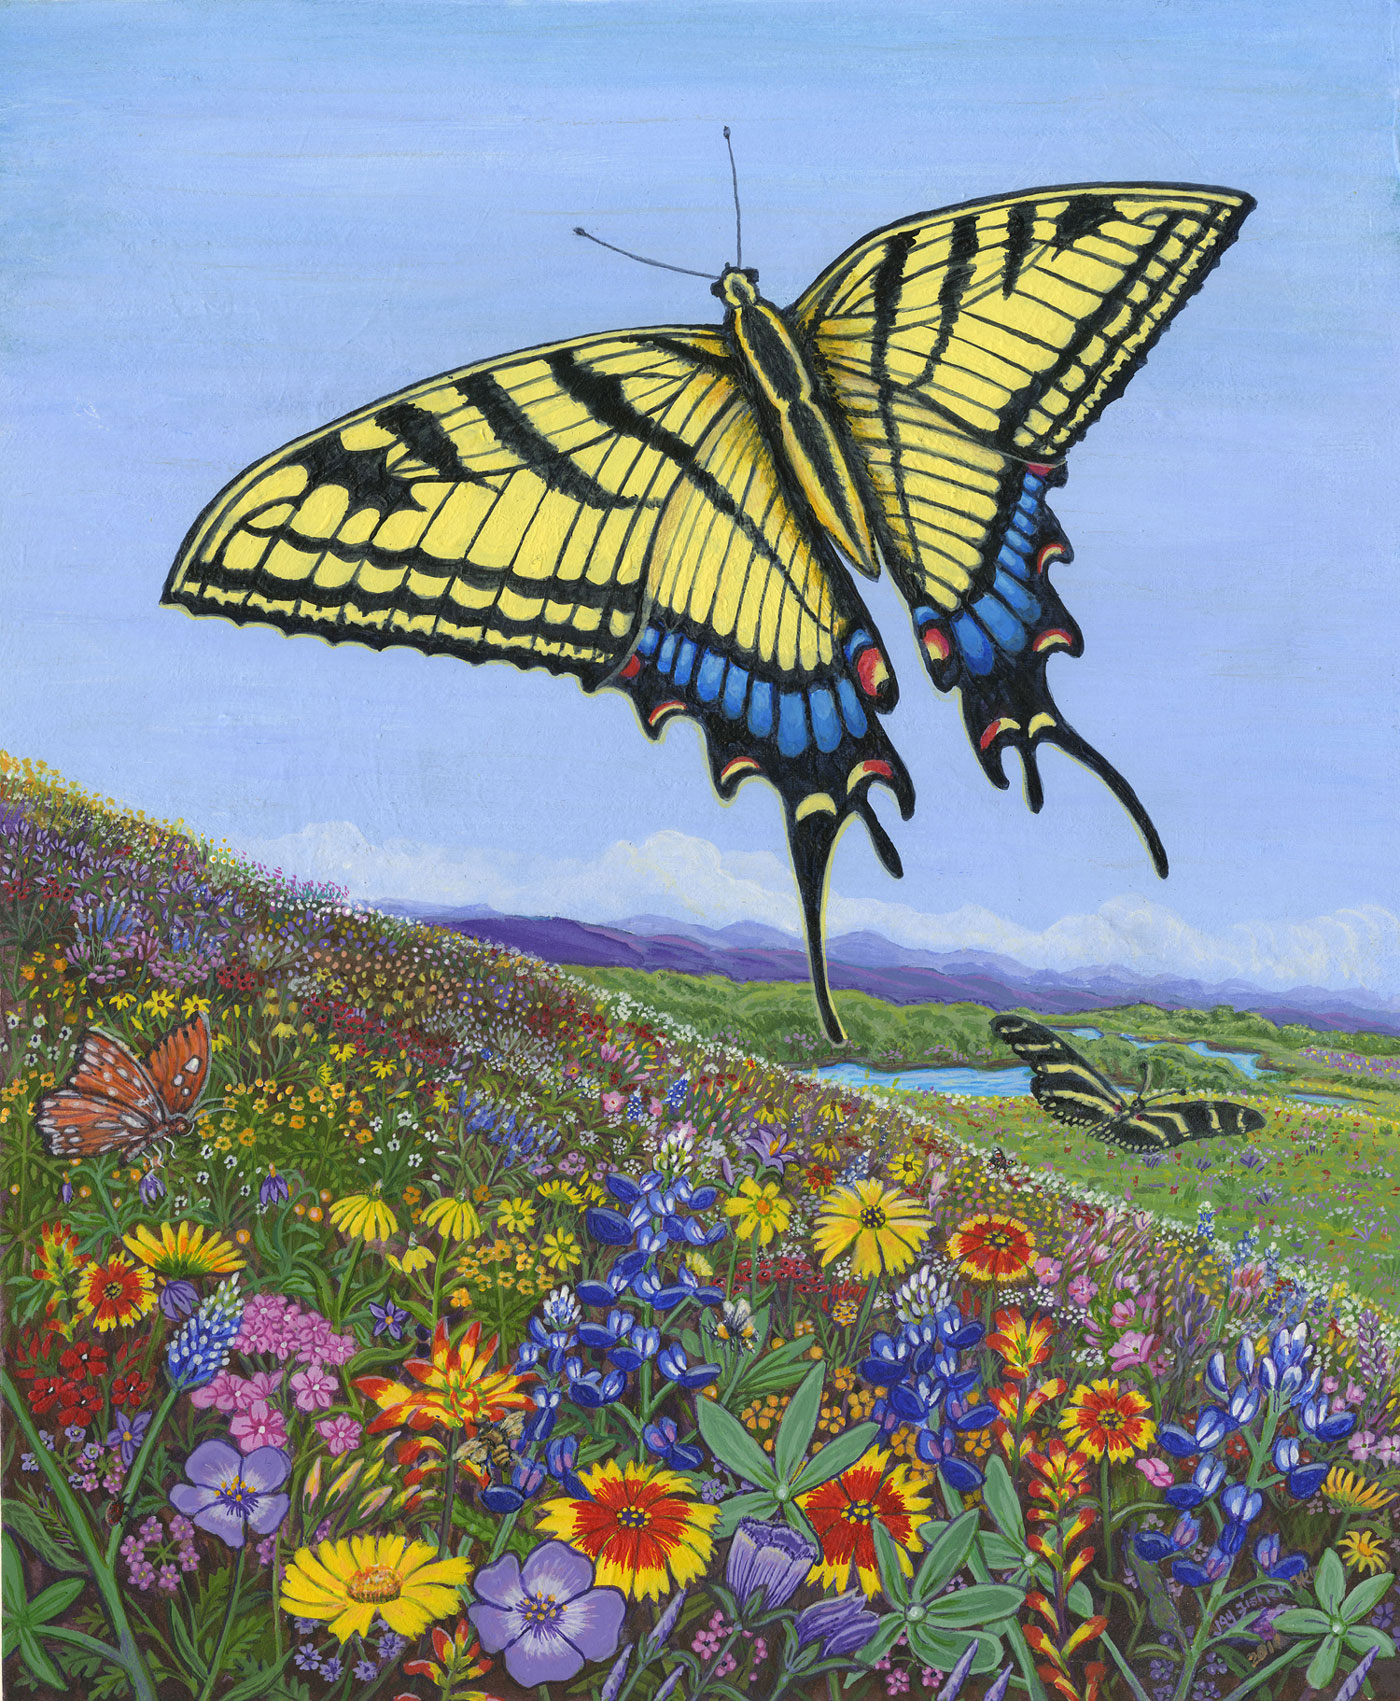 Wildflowers and Butterflies, a painting by Joy Fisher Hein